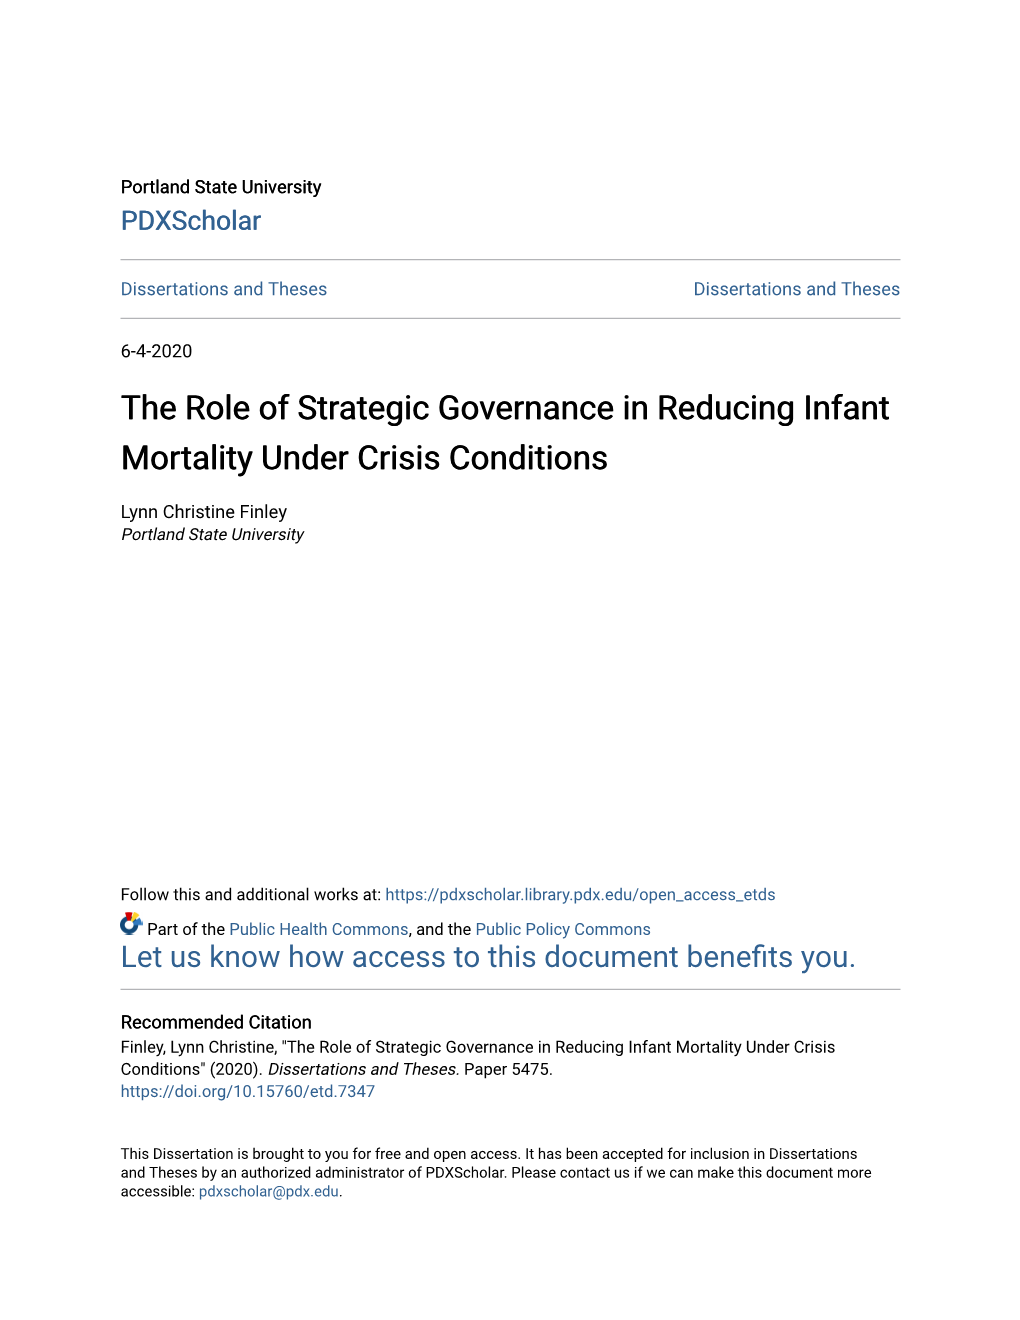 The Role of Strategic Governance in Reducing Infant Mortality Under Crisis Conditions